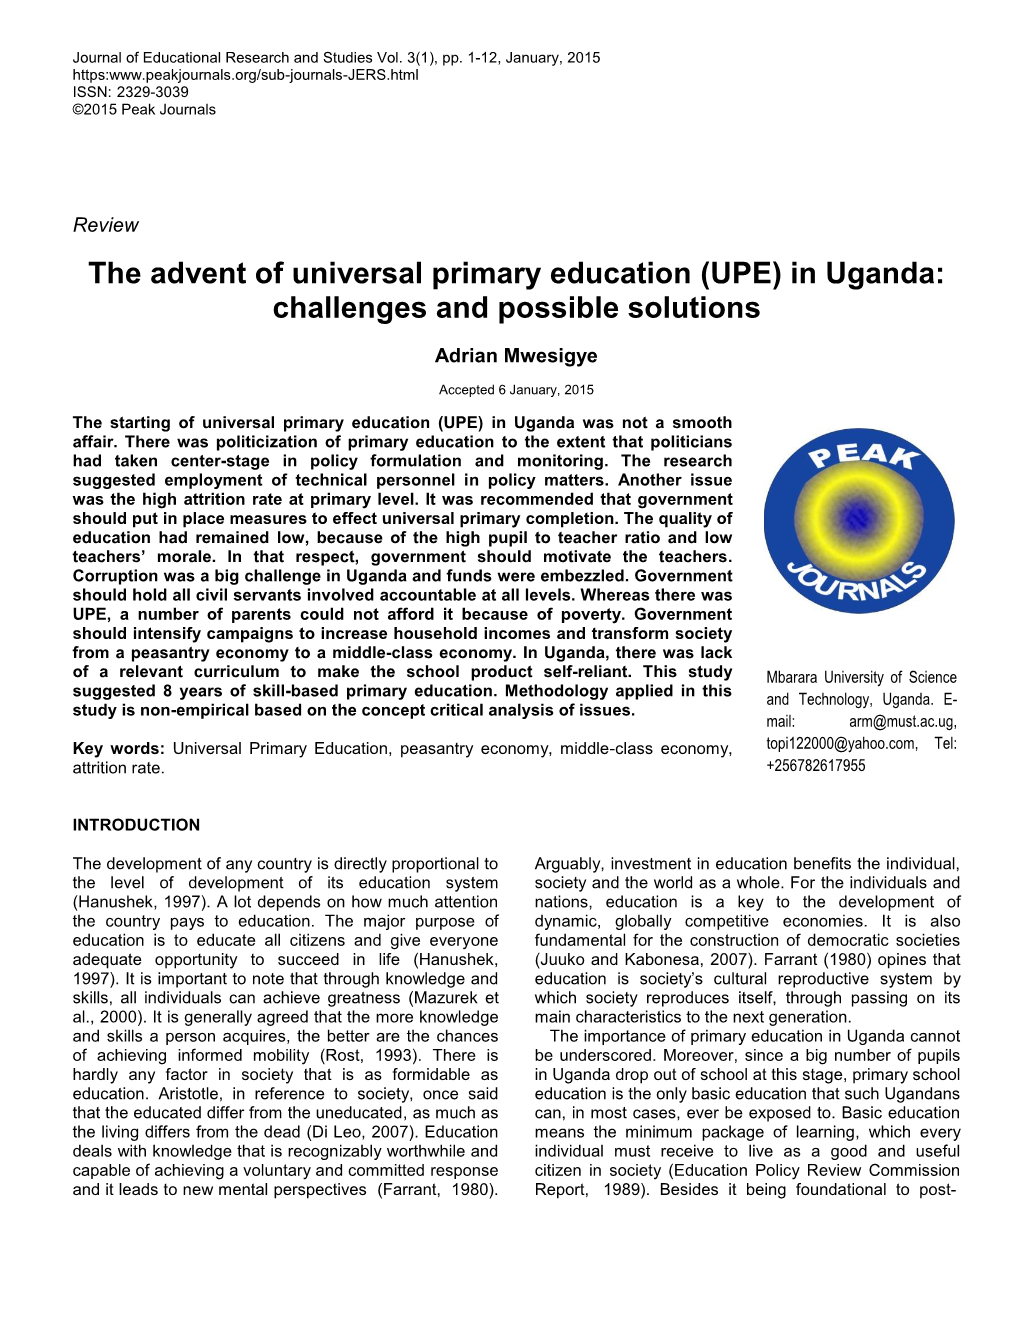 The Advent of Universal Primary Education (UPE) in Uganda: Challenges and Possible Solutions